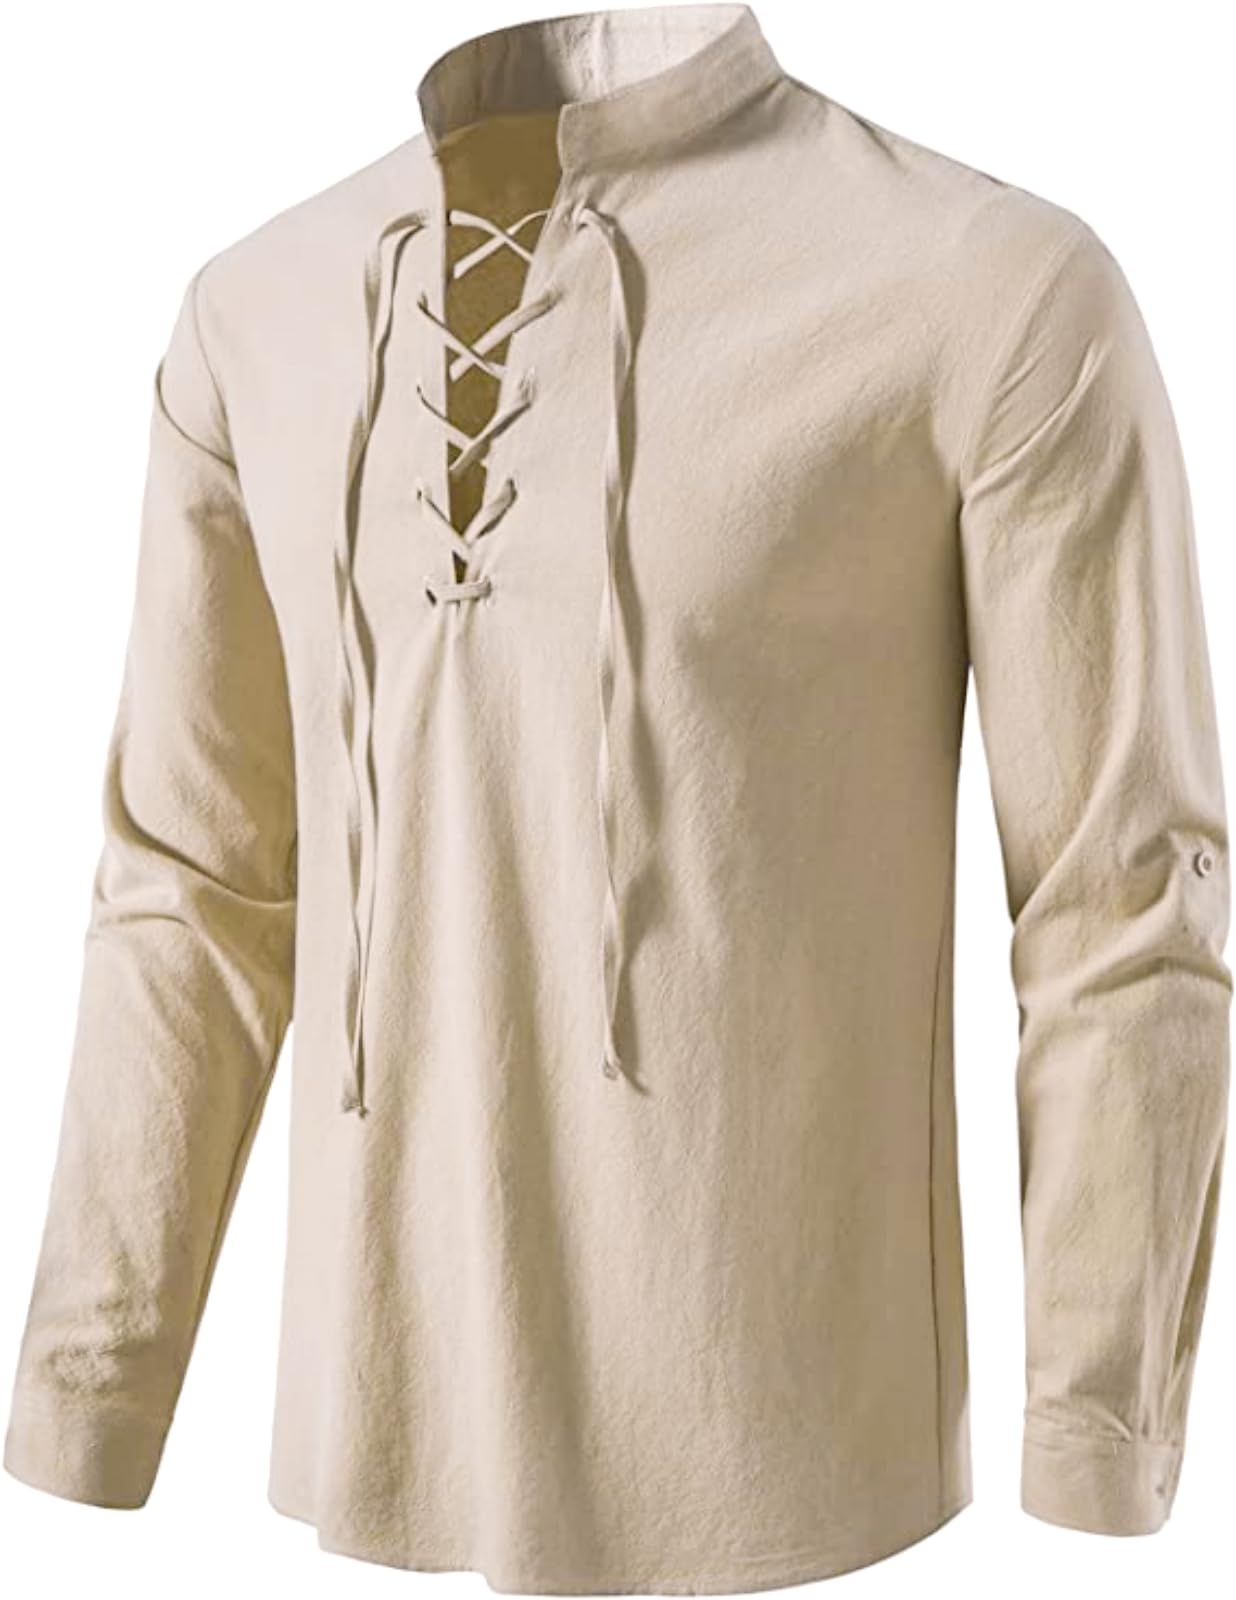 Men's Long Sleeve Shirts Retro Style Lace up for Medieval,Viking,Hippie Halloween Cosplay Pirate Renaissance Costume Small Khaki